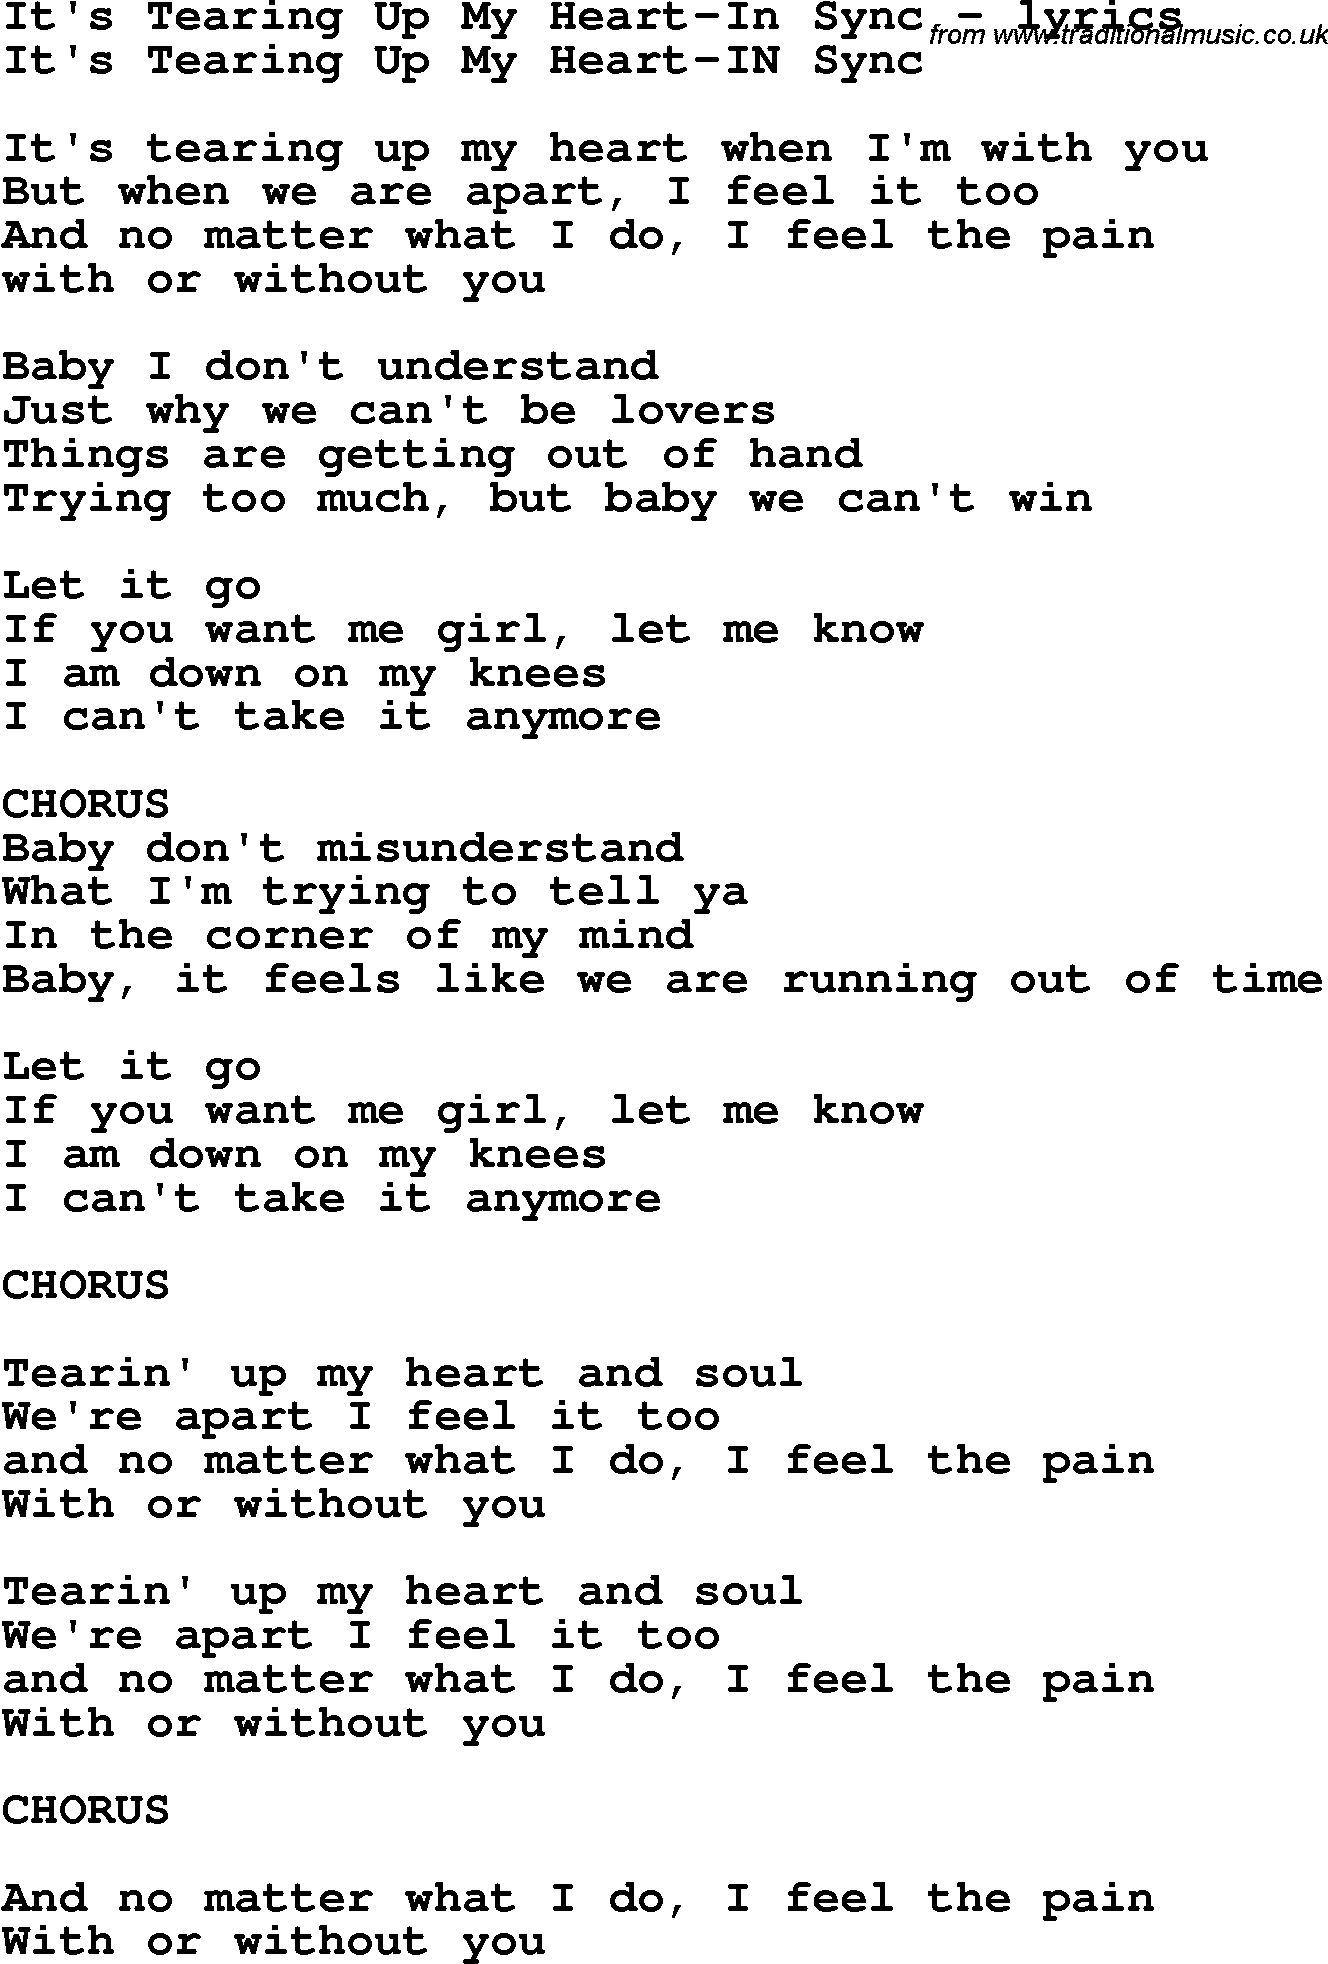 Love Song Lyrics for: It's Tearing Up My Heart-In Sync